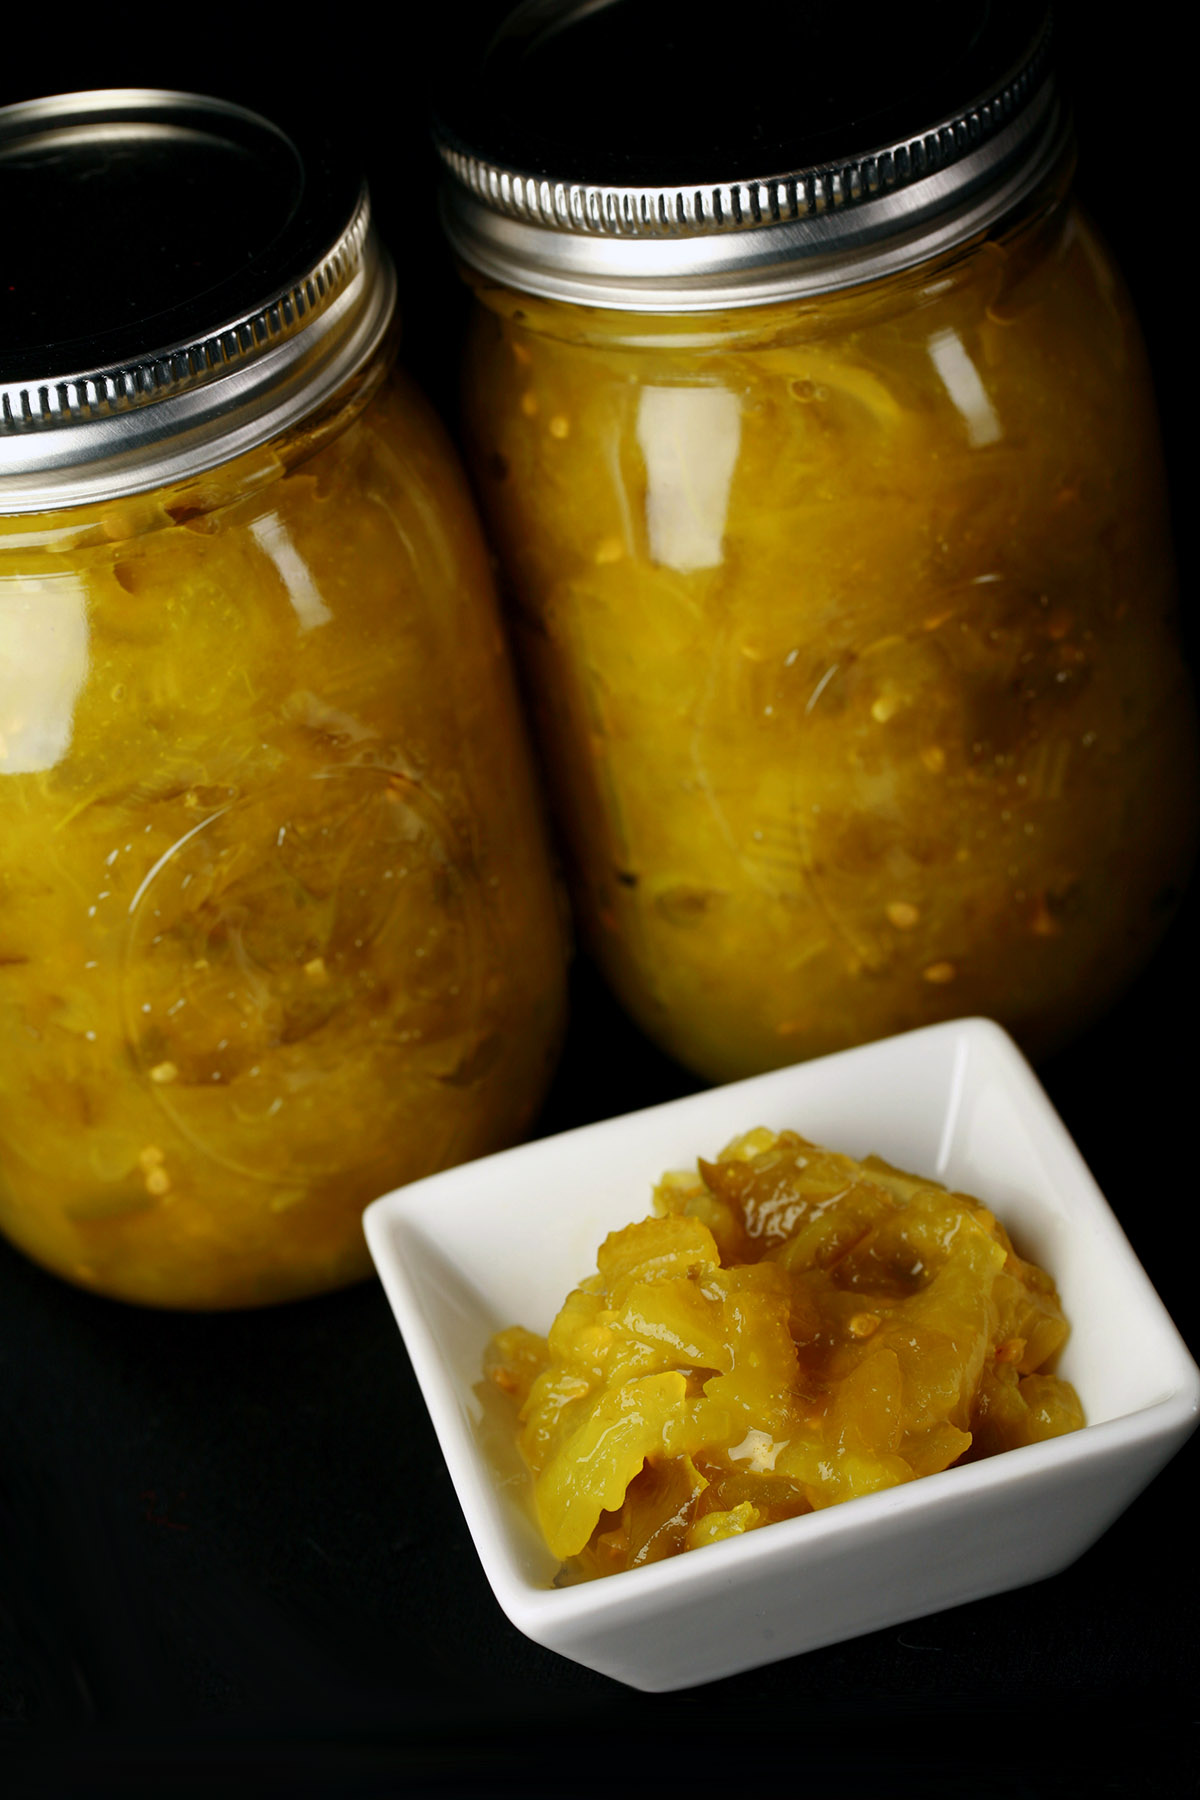 Two jars of chow chow relish, with a little square bowl of the relish in front of them.